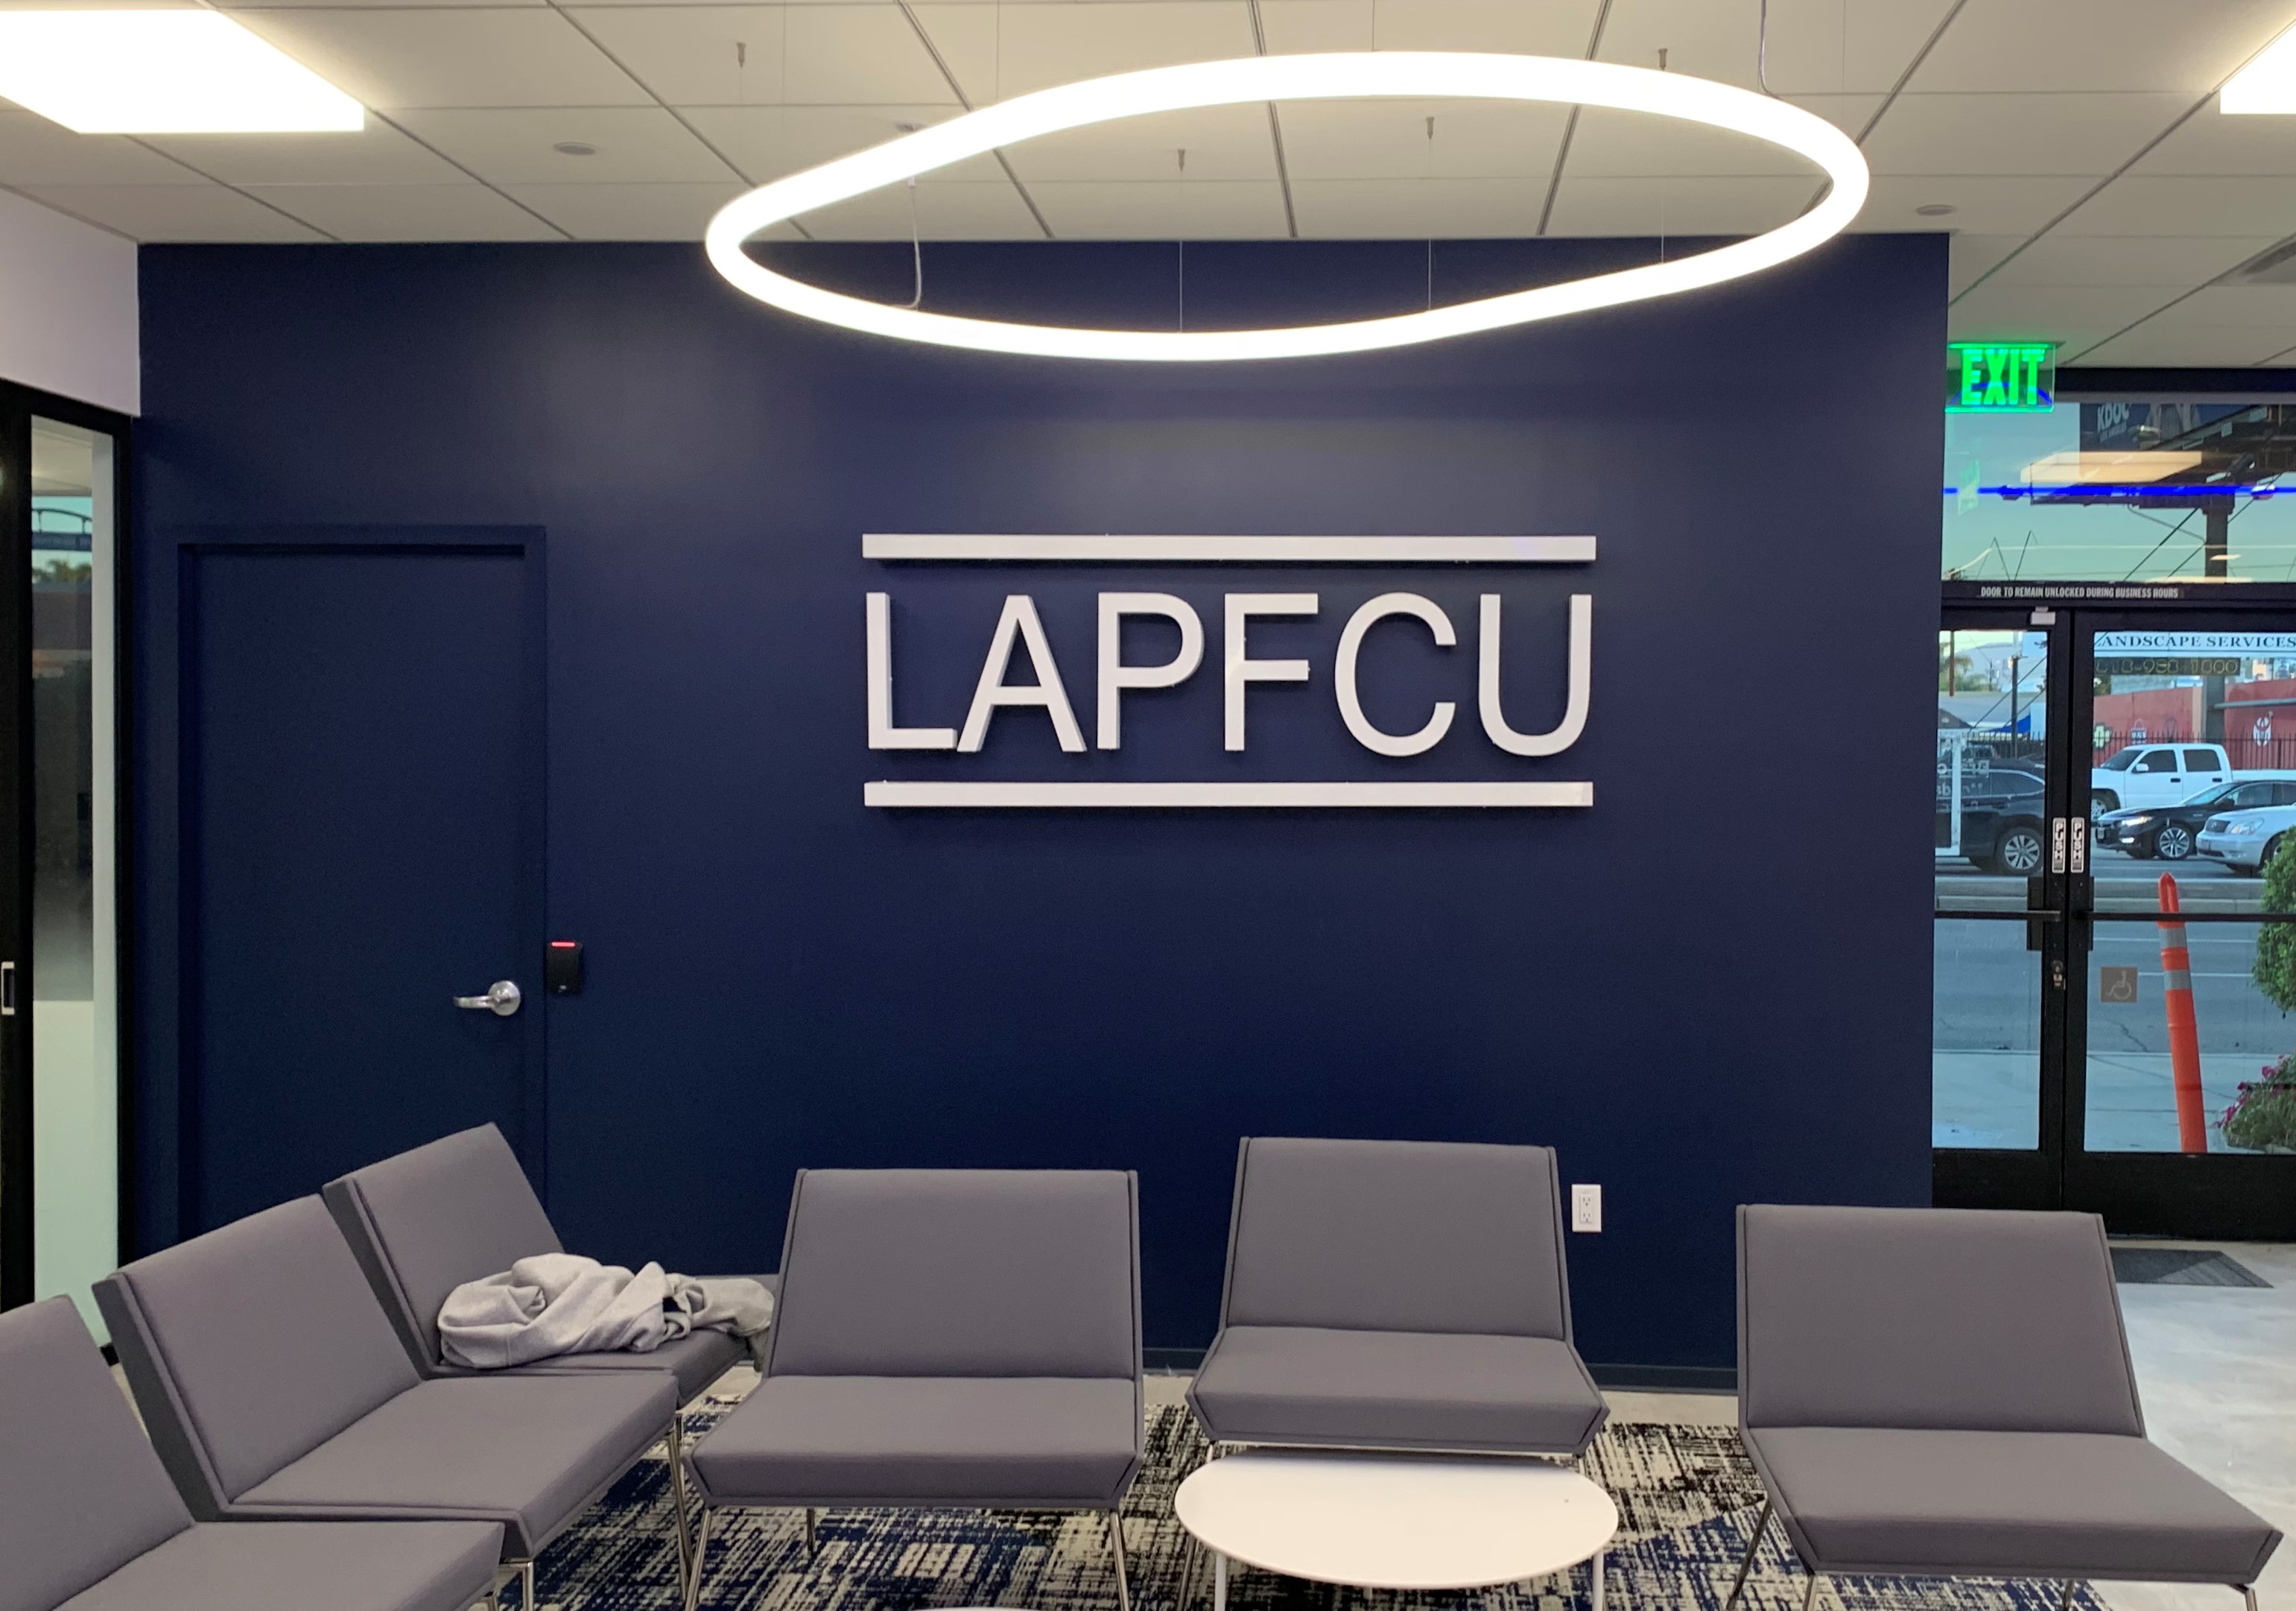 This is the eye-catching backlit lobby sign for LAPFCU's reception area. With these channel letters, their Van Nuys office will be visually impressive.